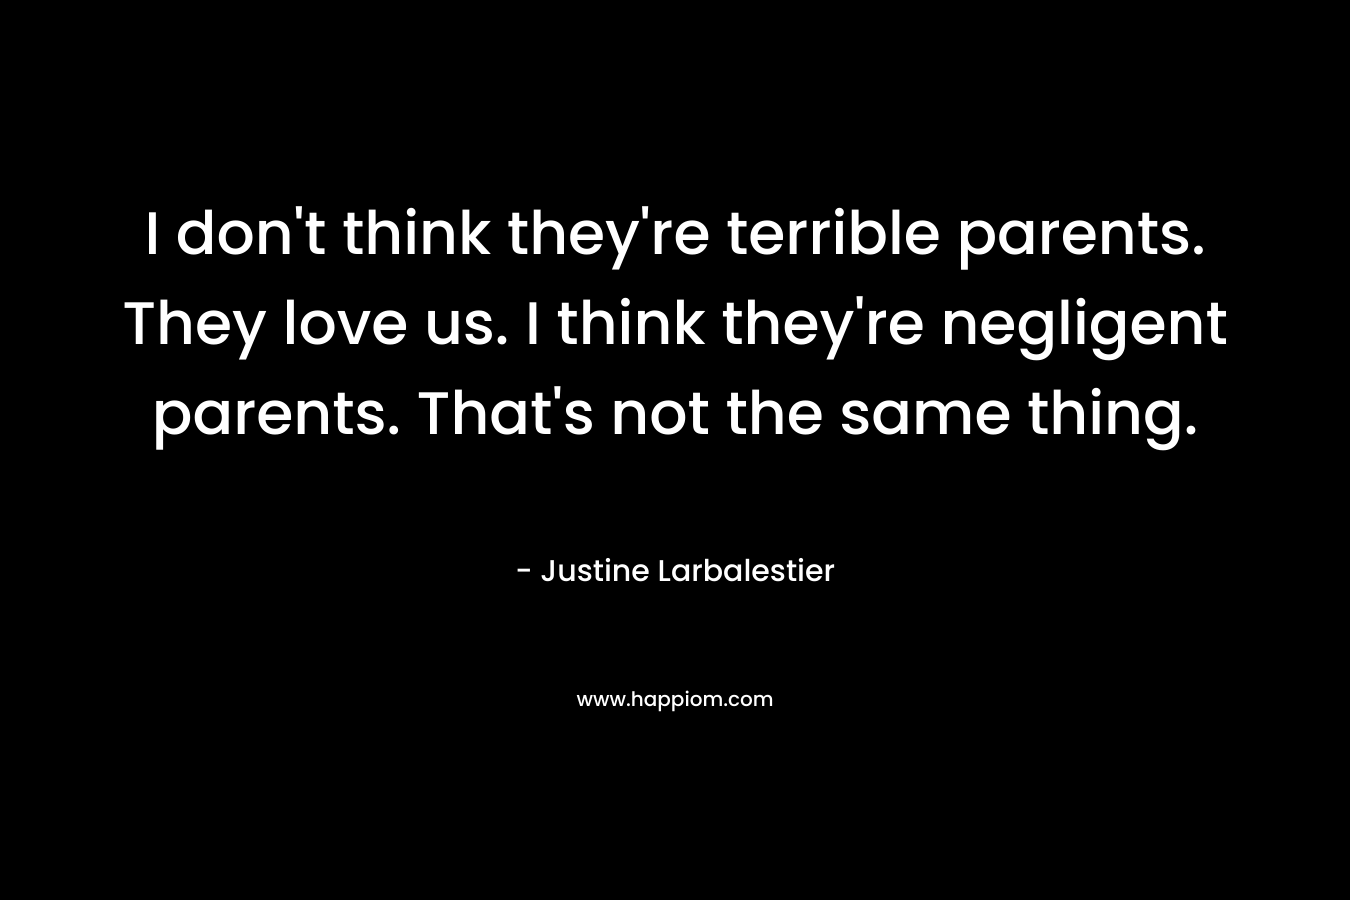 I don't think they're terrible parents. They love us. I think they're negligent parents. That's not the same thing.